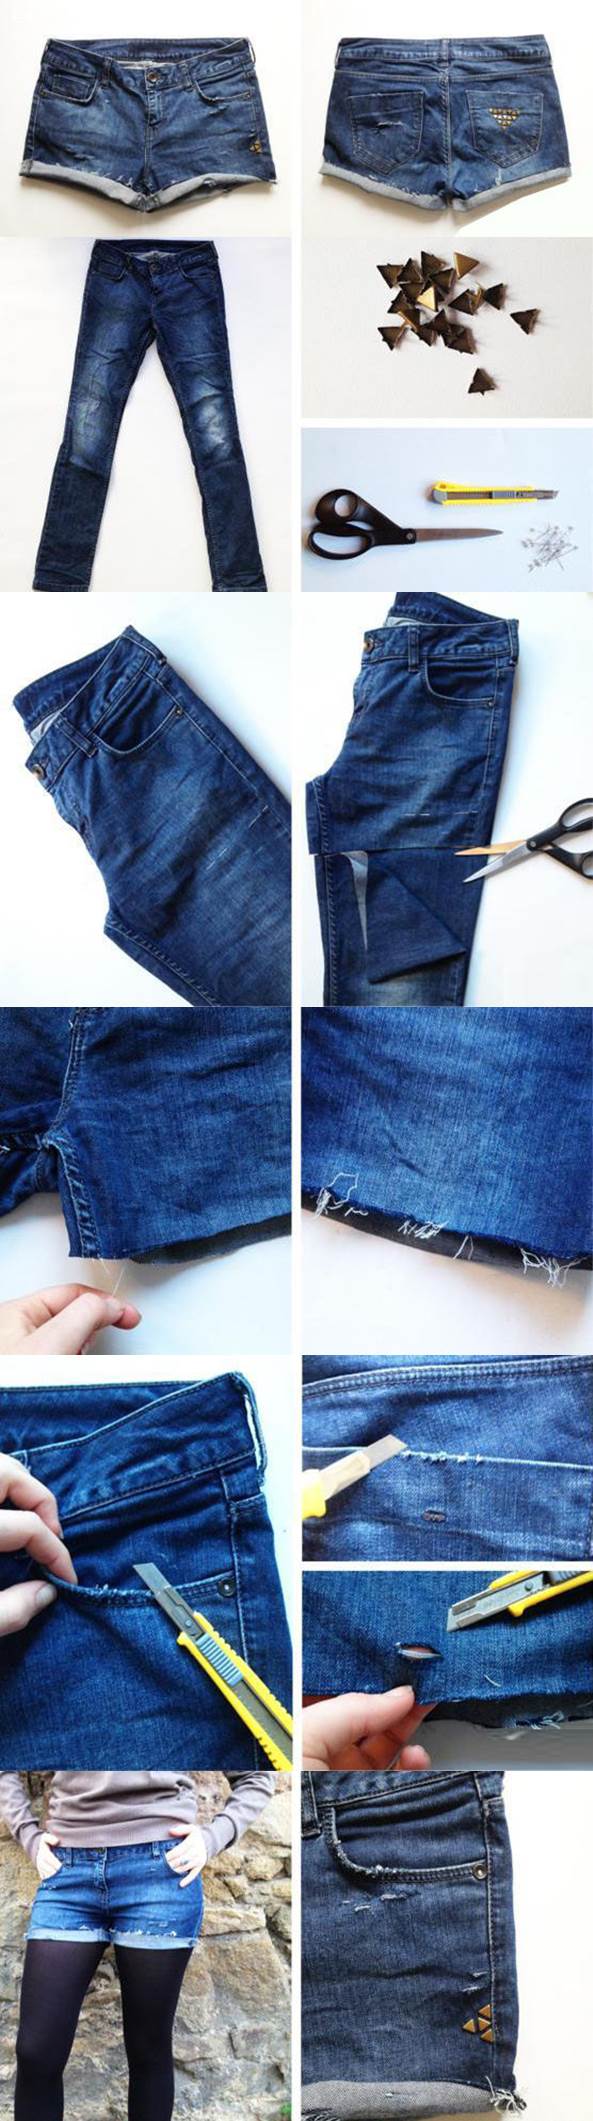 DIY Studded Shorts from Old Jeans 2